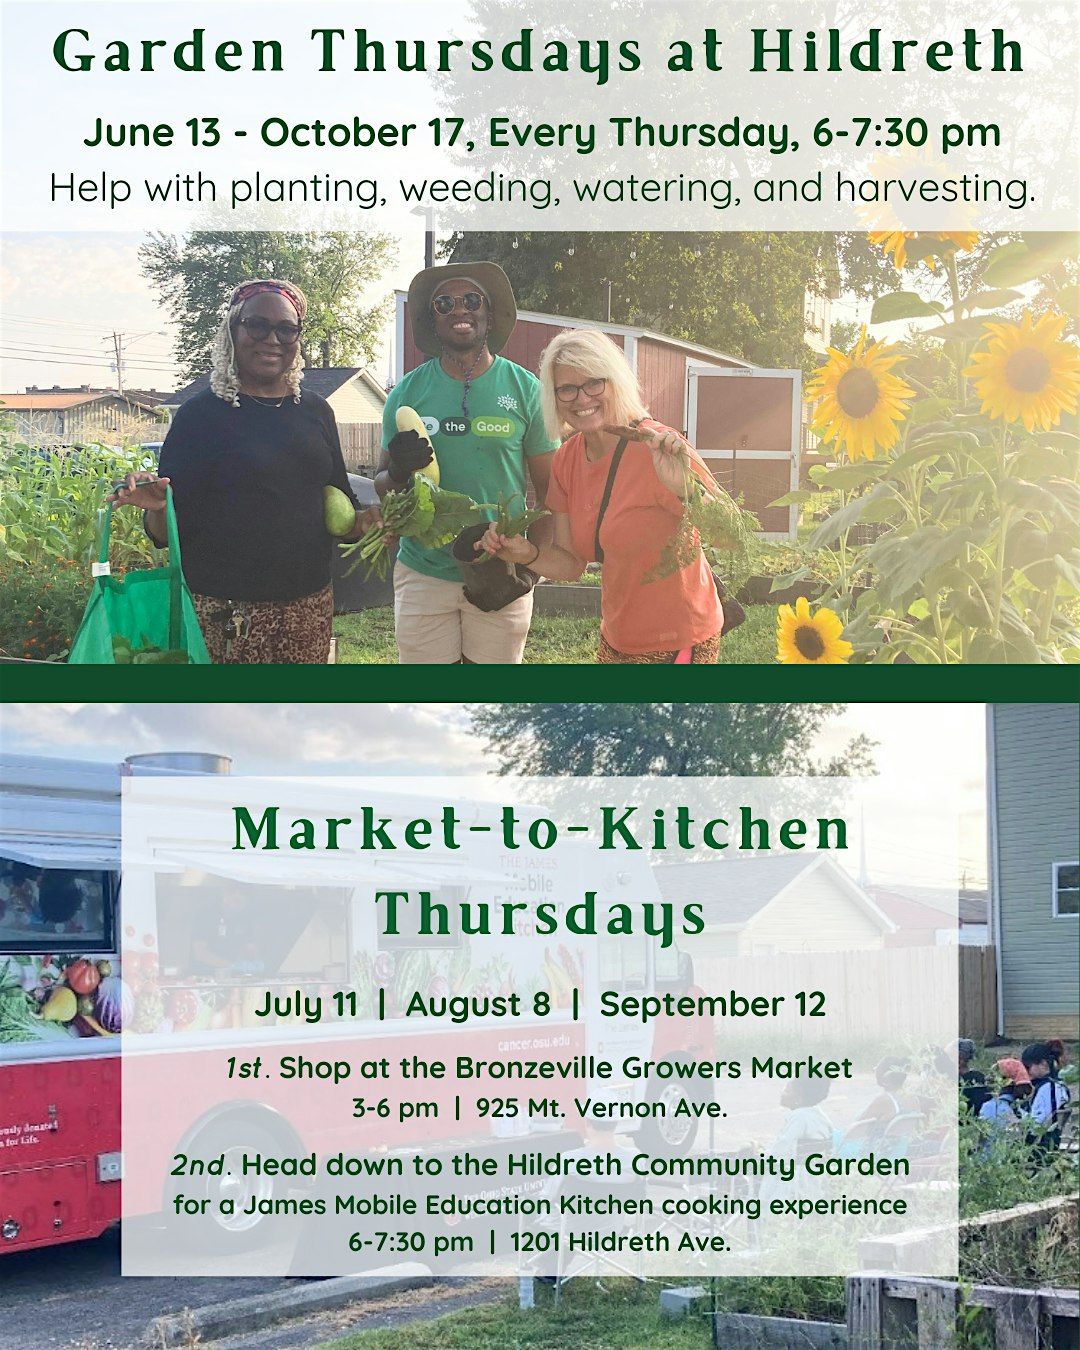 August 8th Market-to-Kitchen Thursday by the Growing and Growth Collective